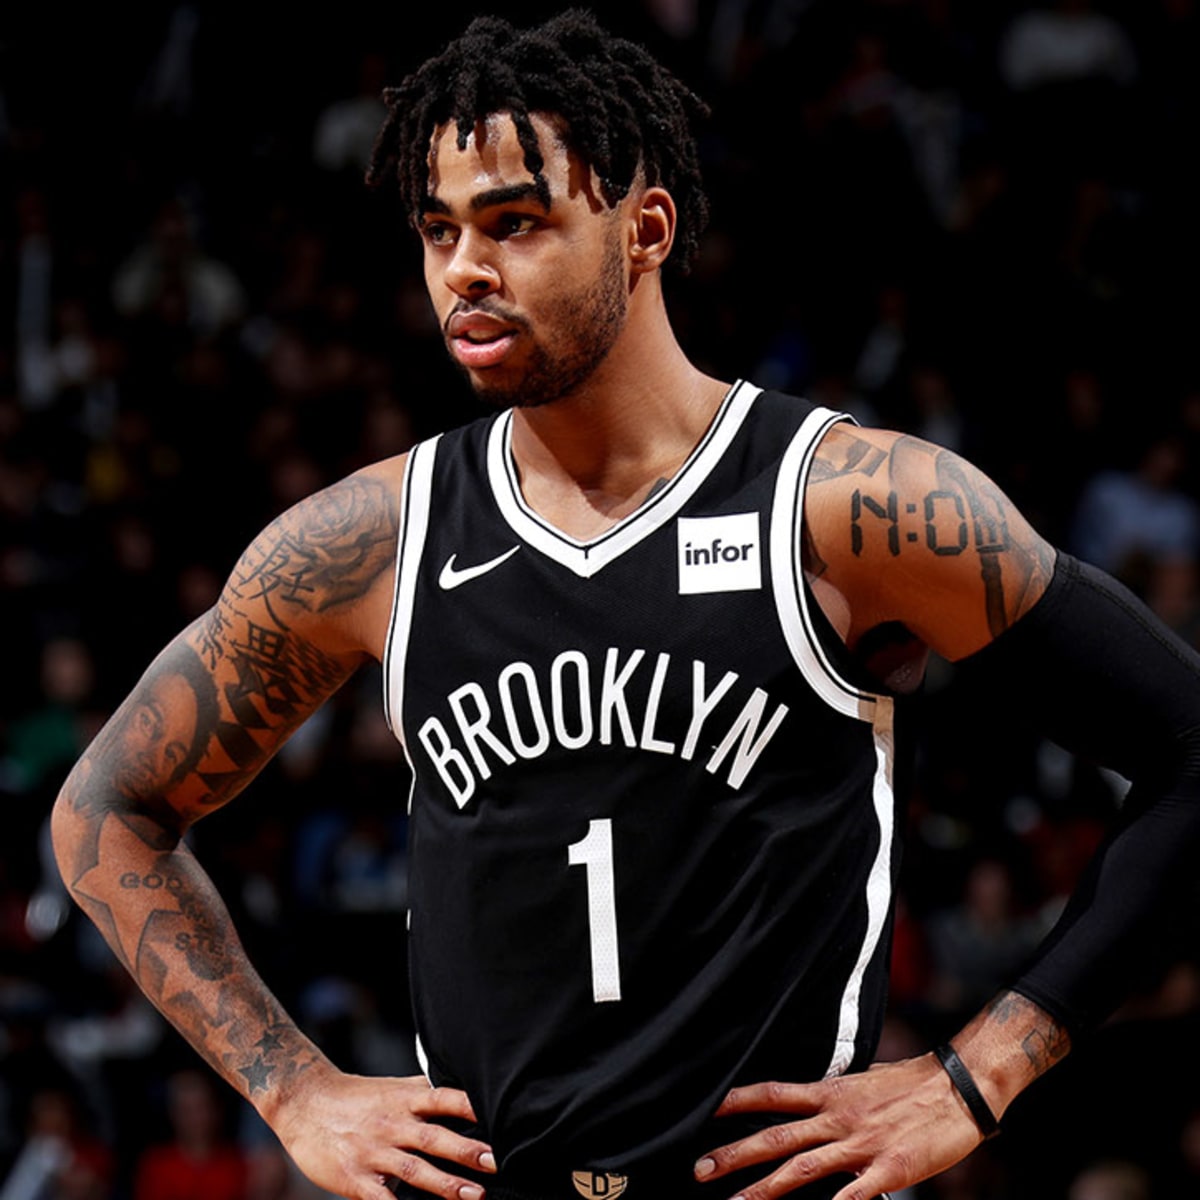 ❄️ on X: Everyone vote For D'angelo Russell for All Star Game